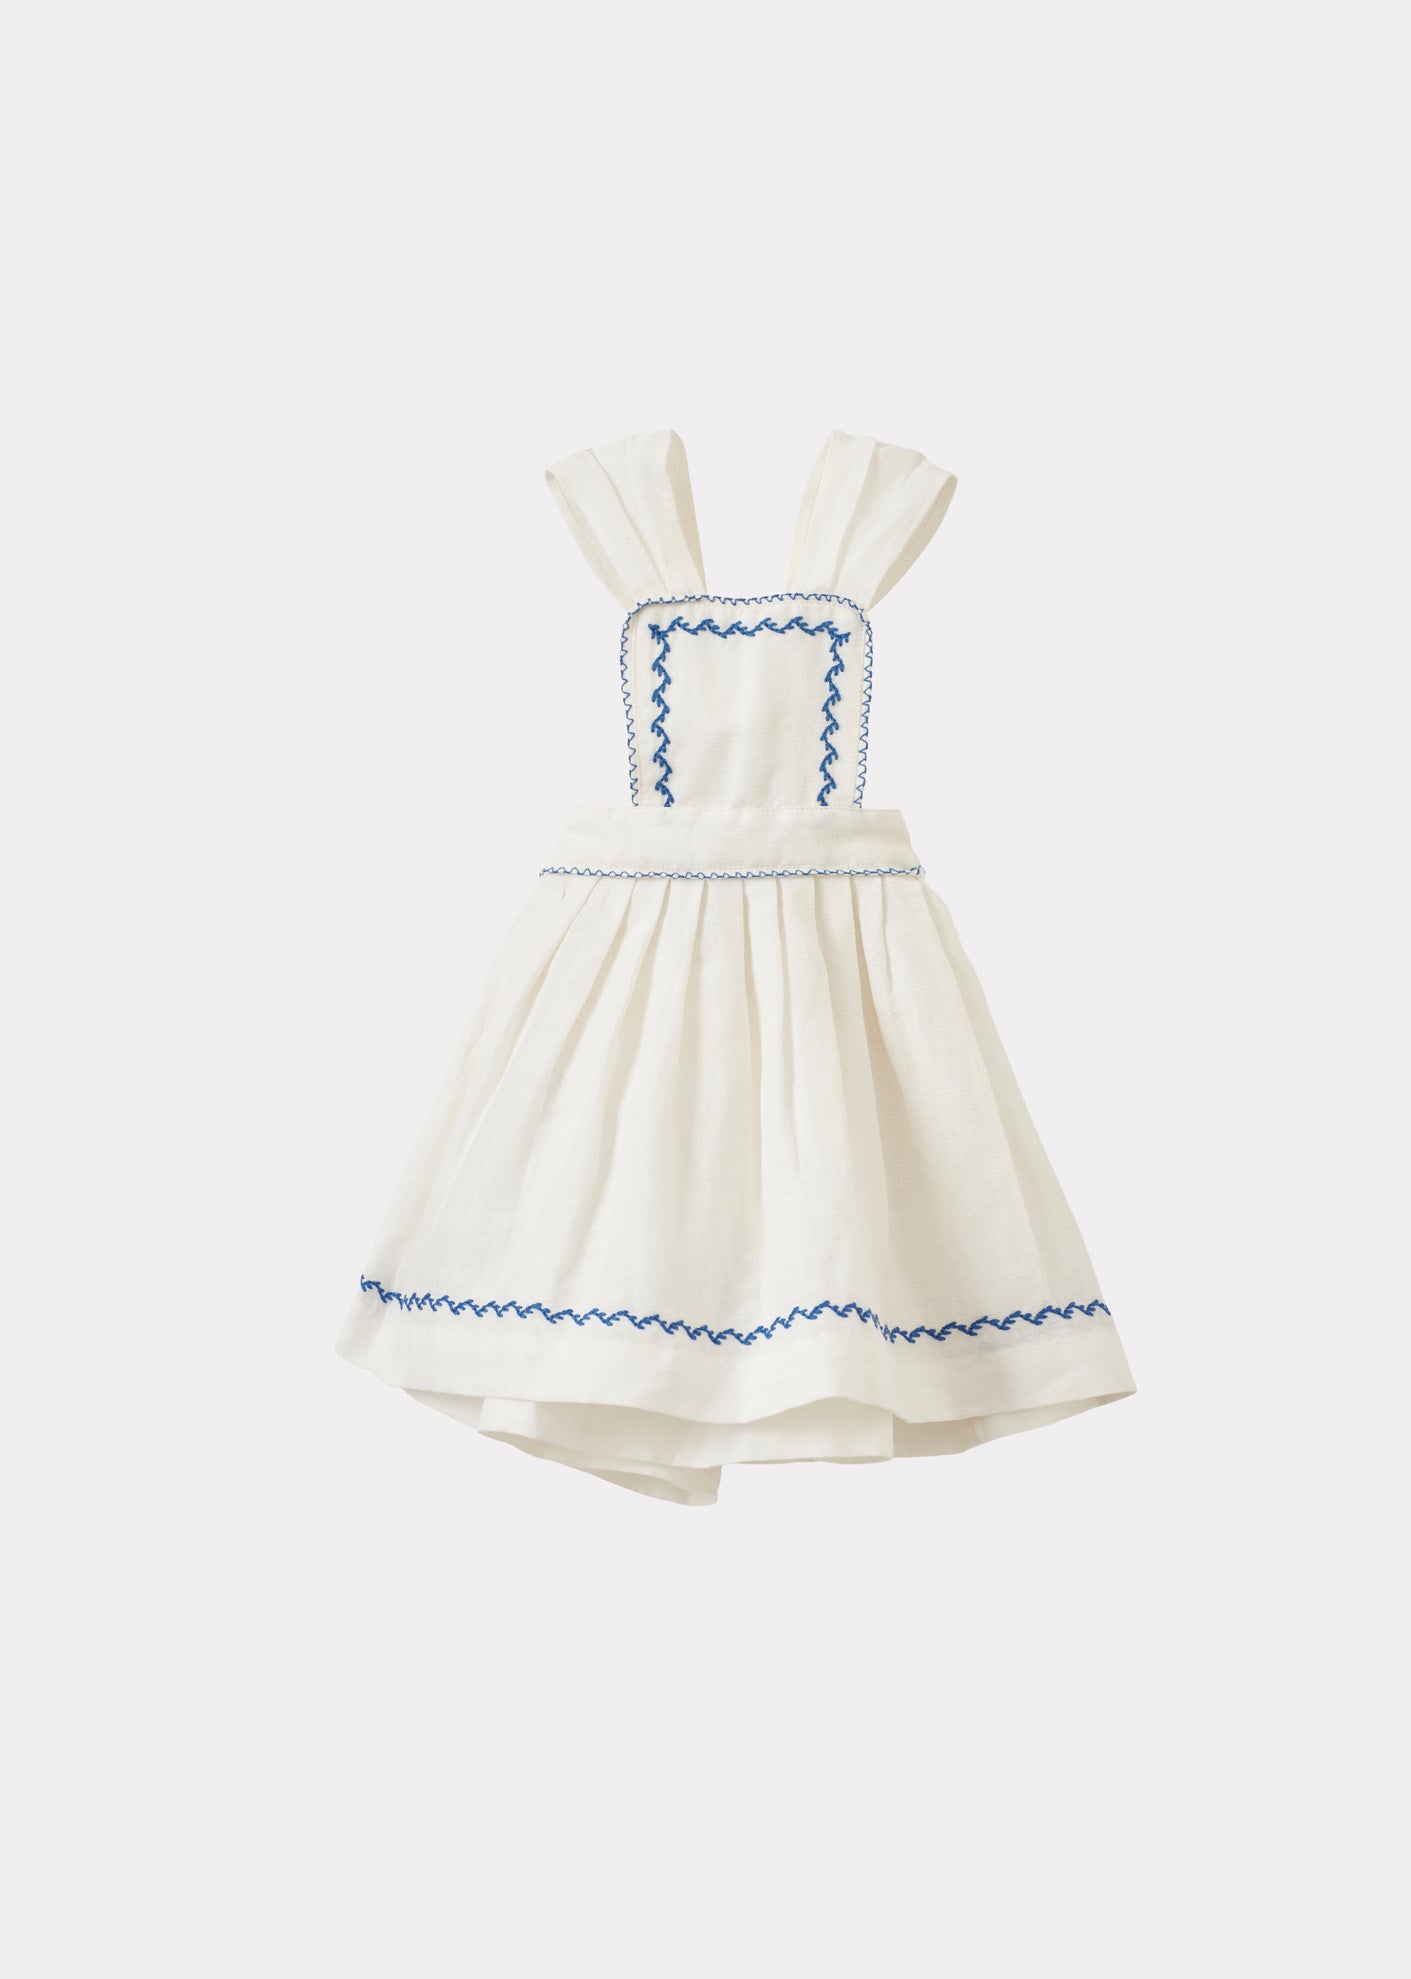 PEPPERMINT BABY DRESS - WHITE